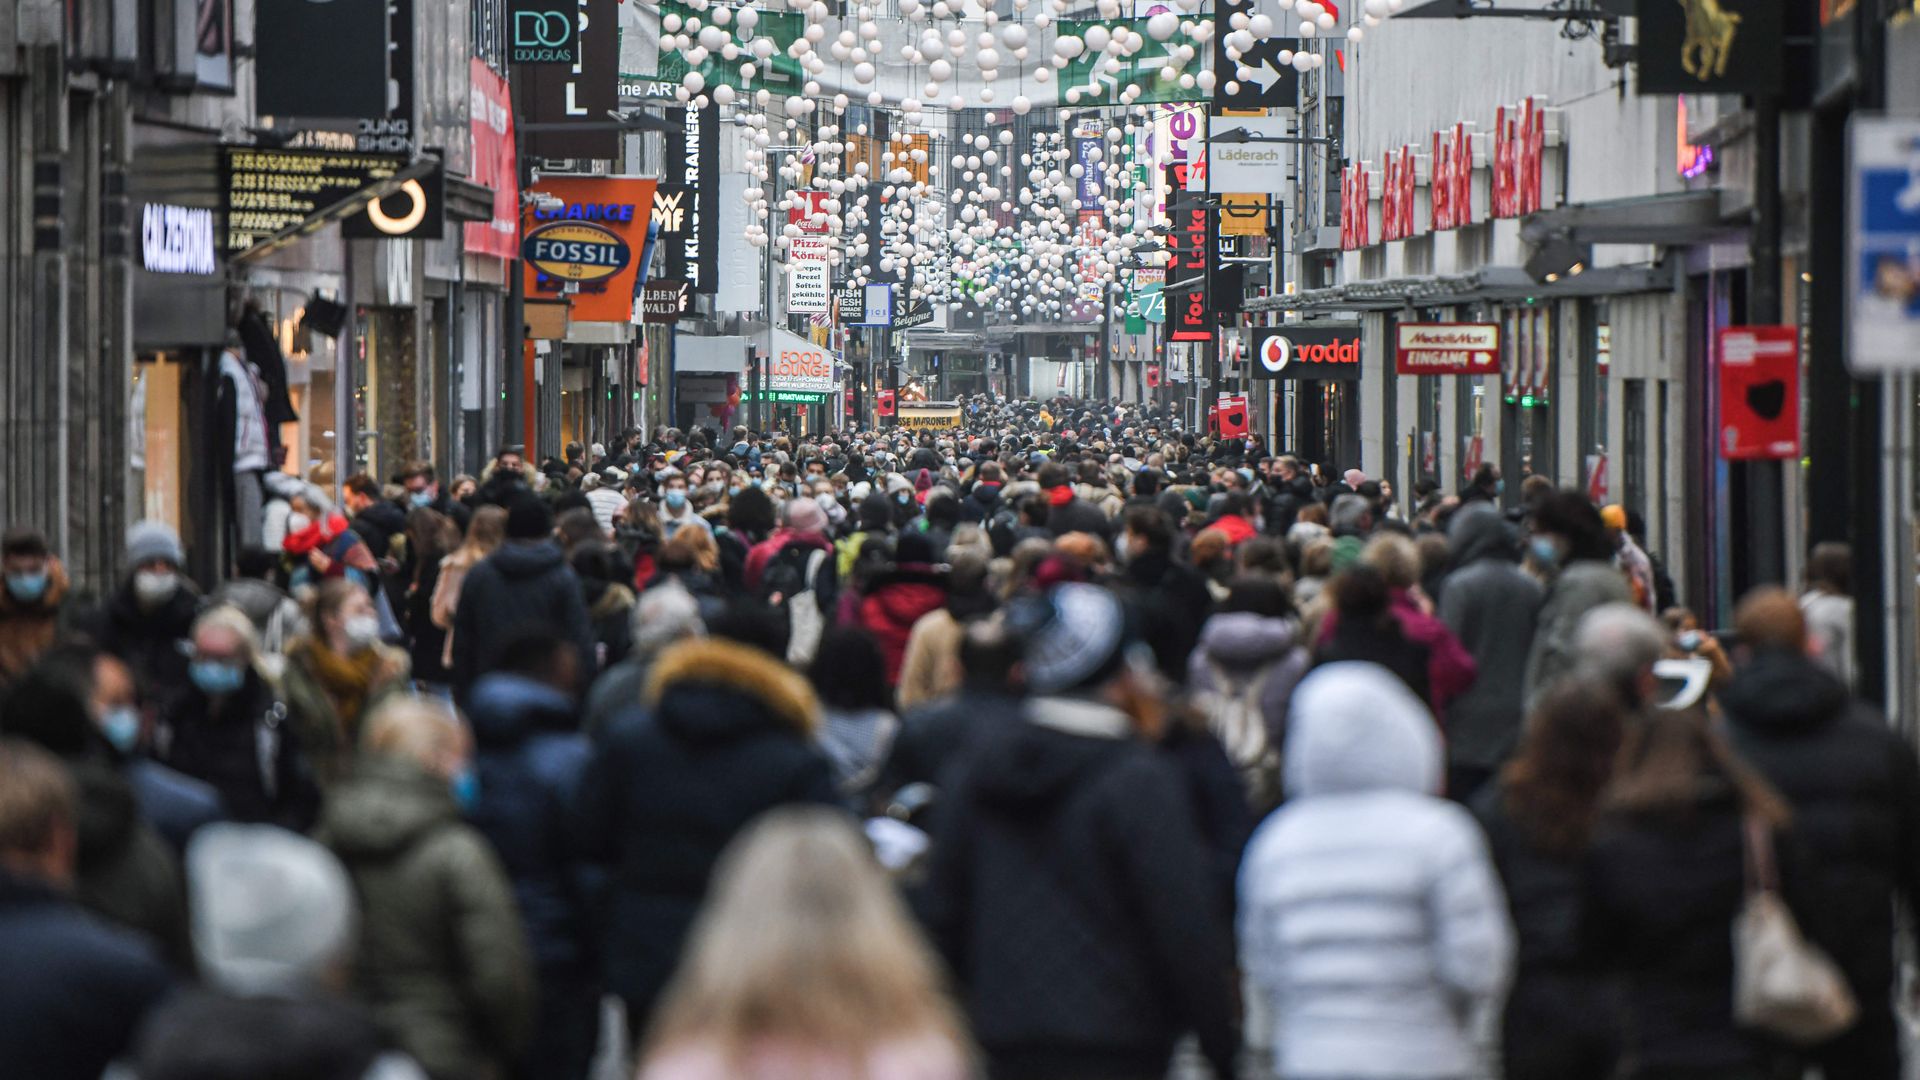 People are seen wearing face masks as they walk in a pedestrian street among shops and Christmas decorations in the city of Cologne, western Germany, on December 18, 2021. 